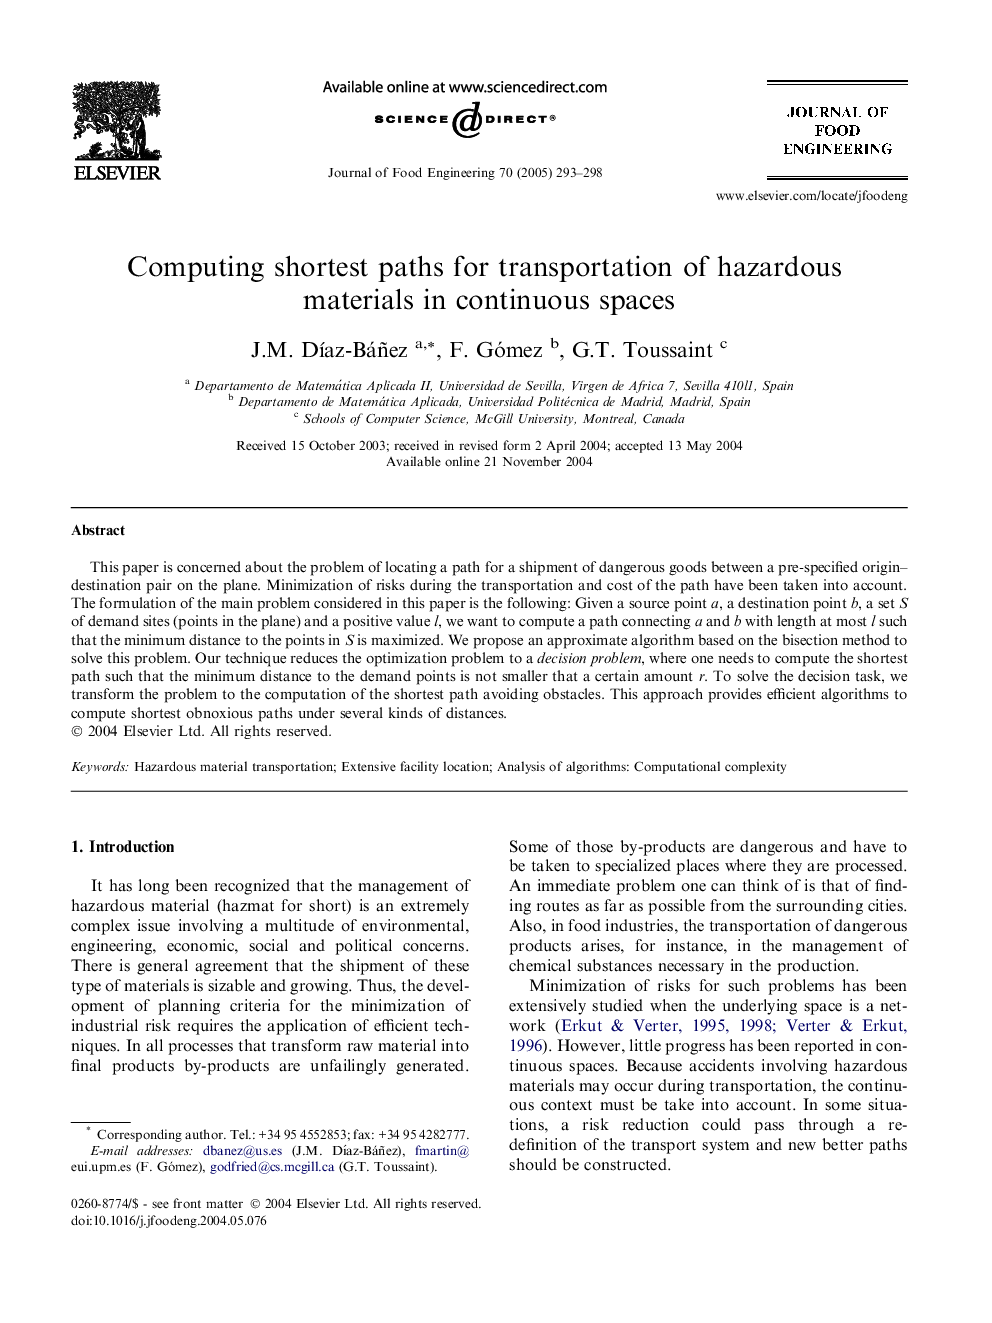 Computing shortest paths for transportation of hazardous materials in continuous spaces